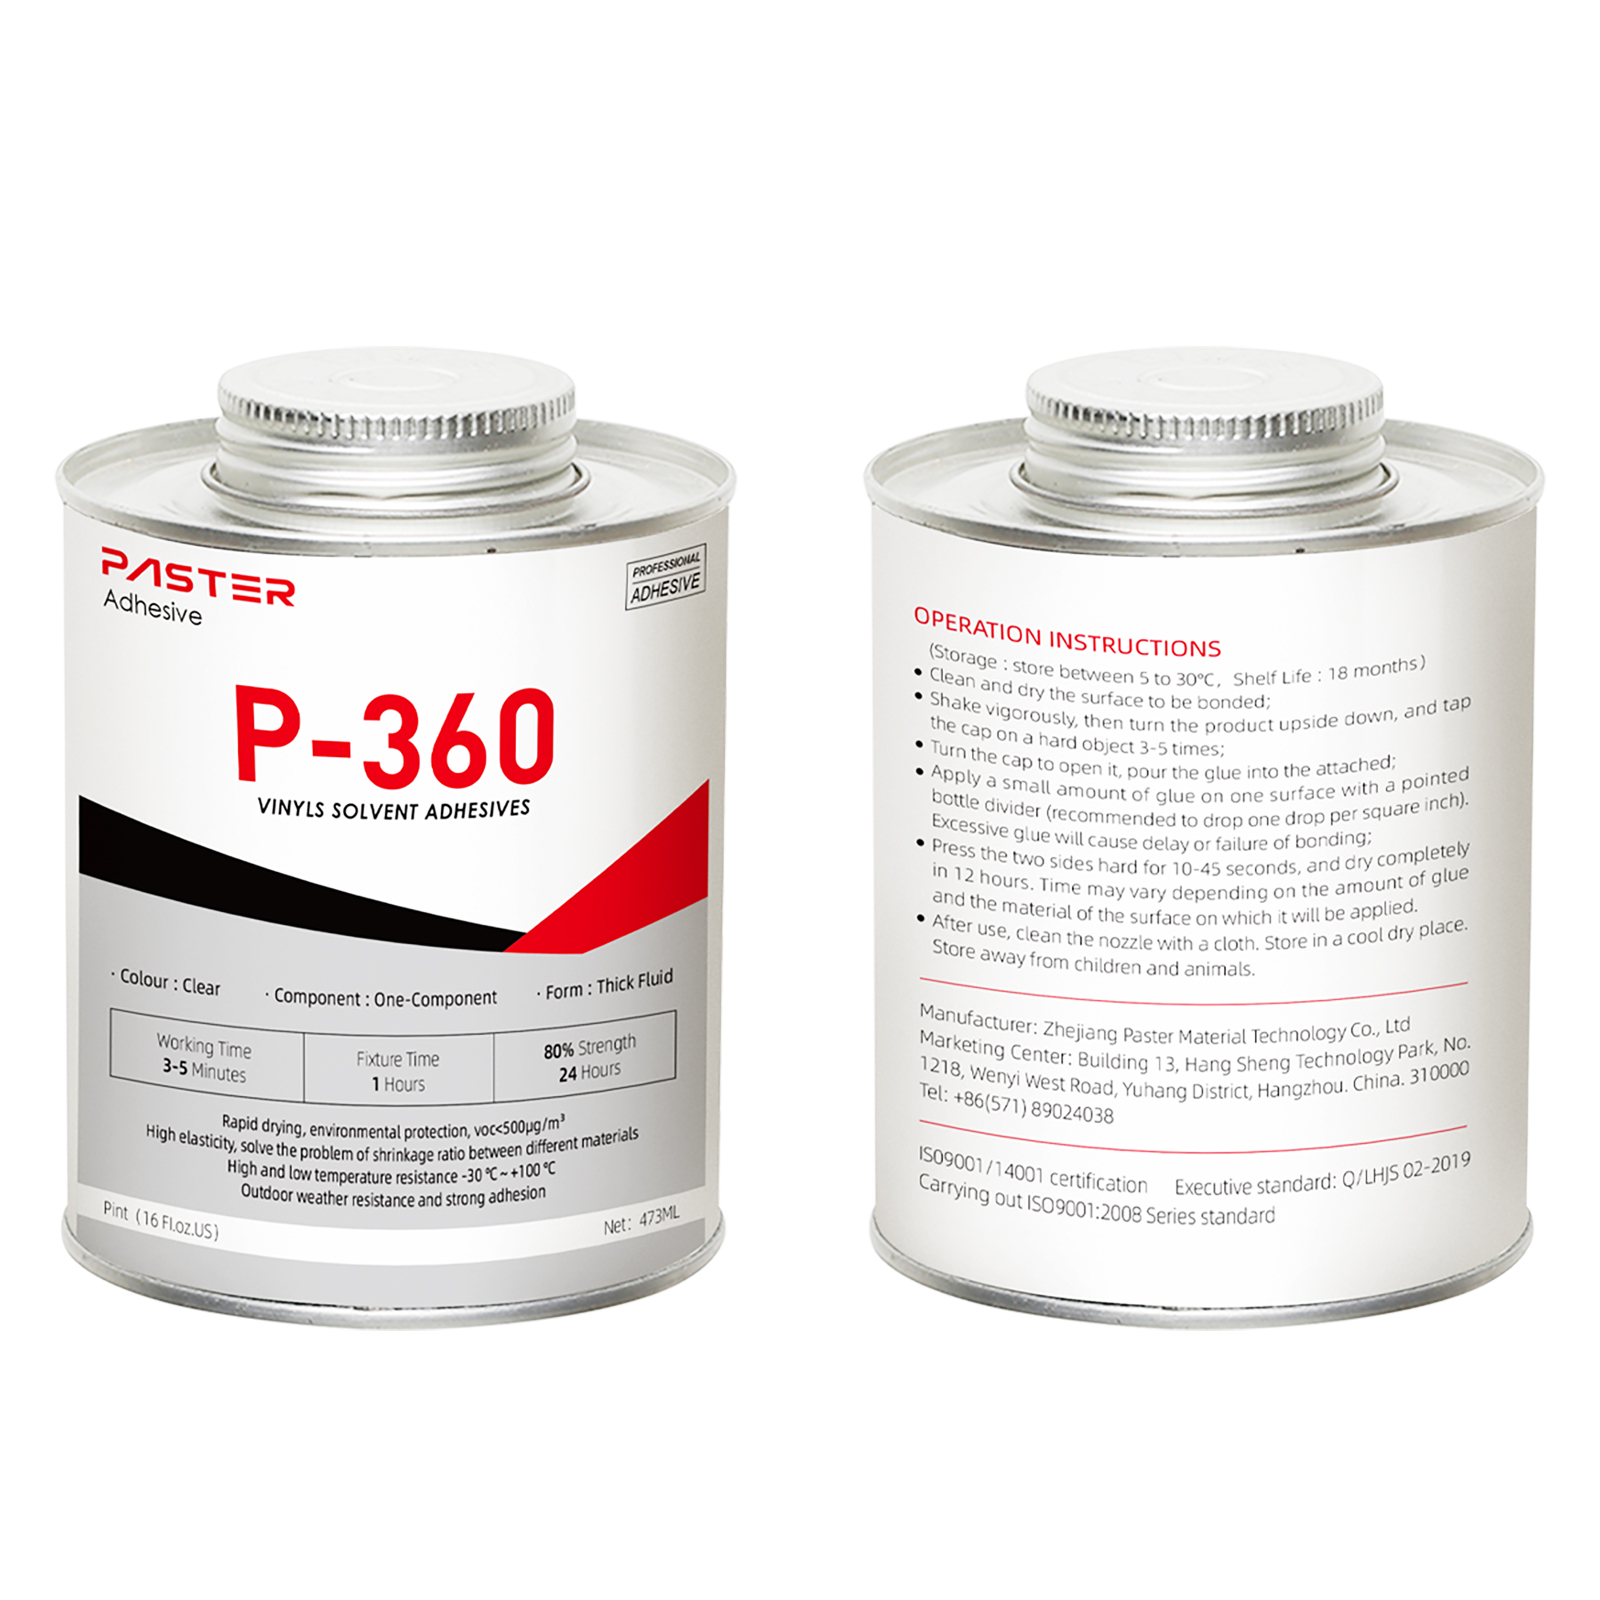 Sample-P-360 Special Adhesive for Borderless Fonts Channel Letter Vinyls Solvent Adhesives